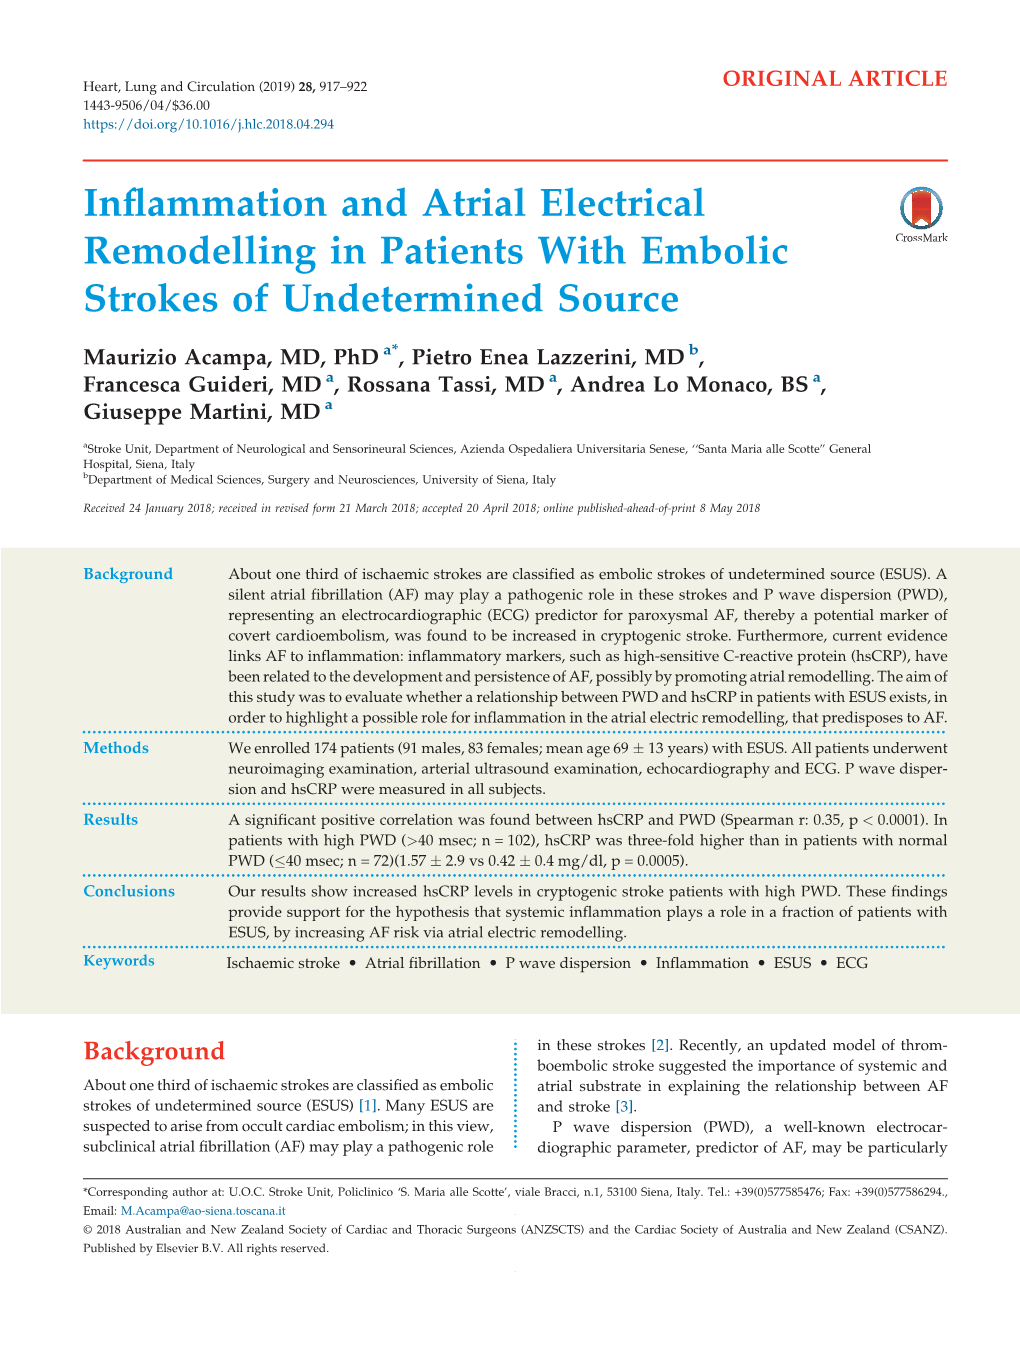 Inflammation and Atrial Electrical Remodelling in Patients With